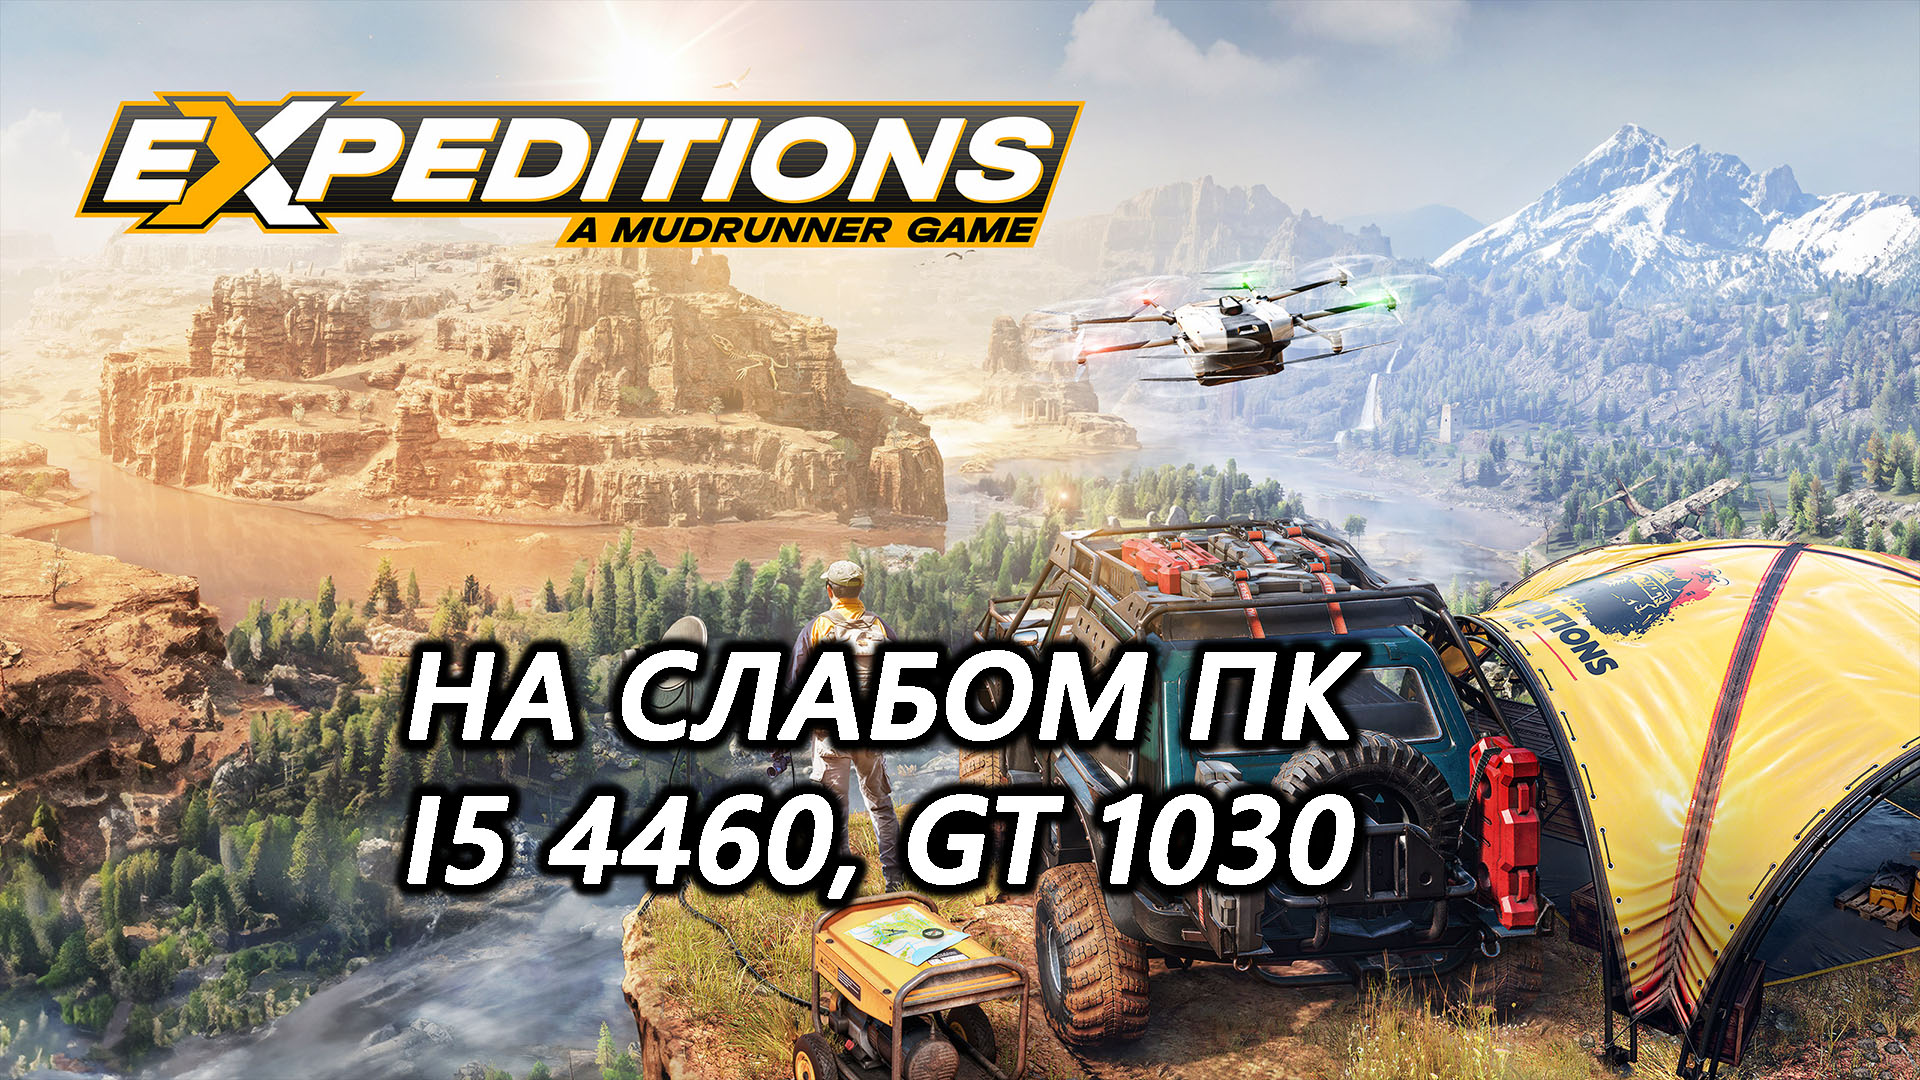 Expeditions A MudRunner Game на слабом пк (GT 1030)